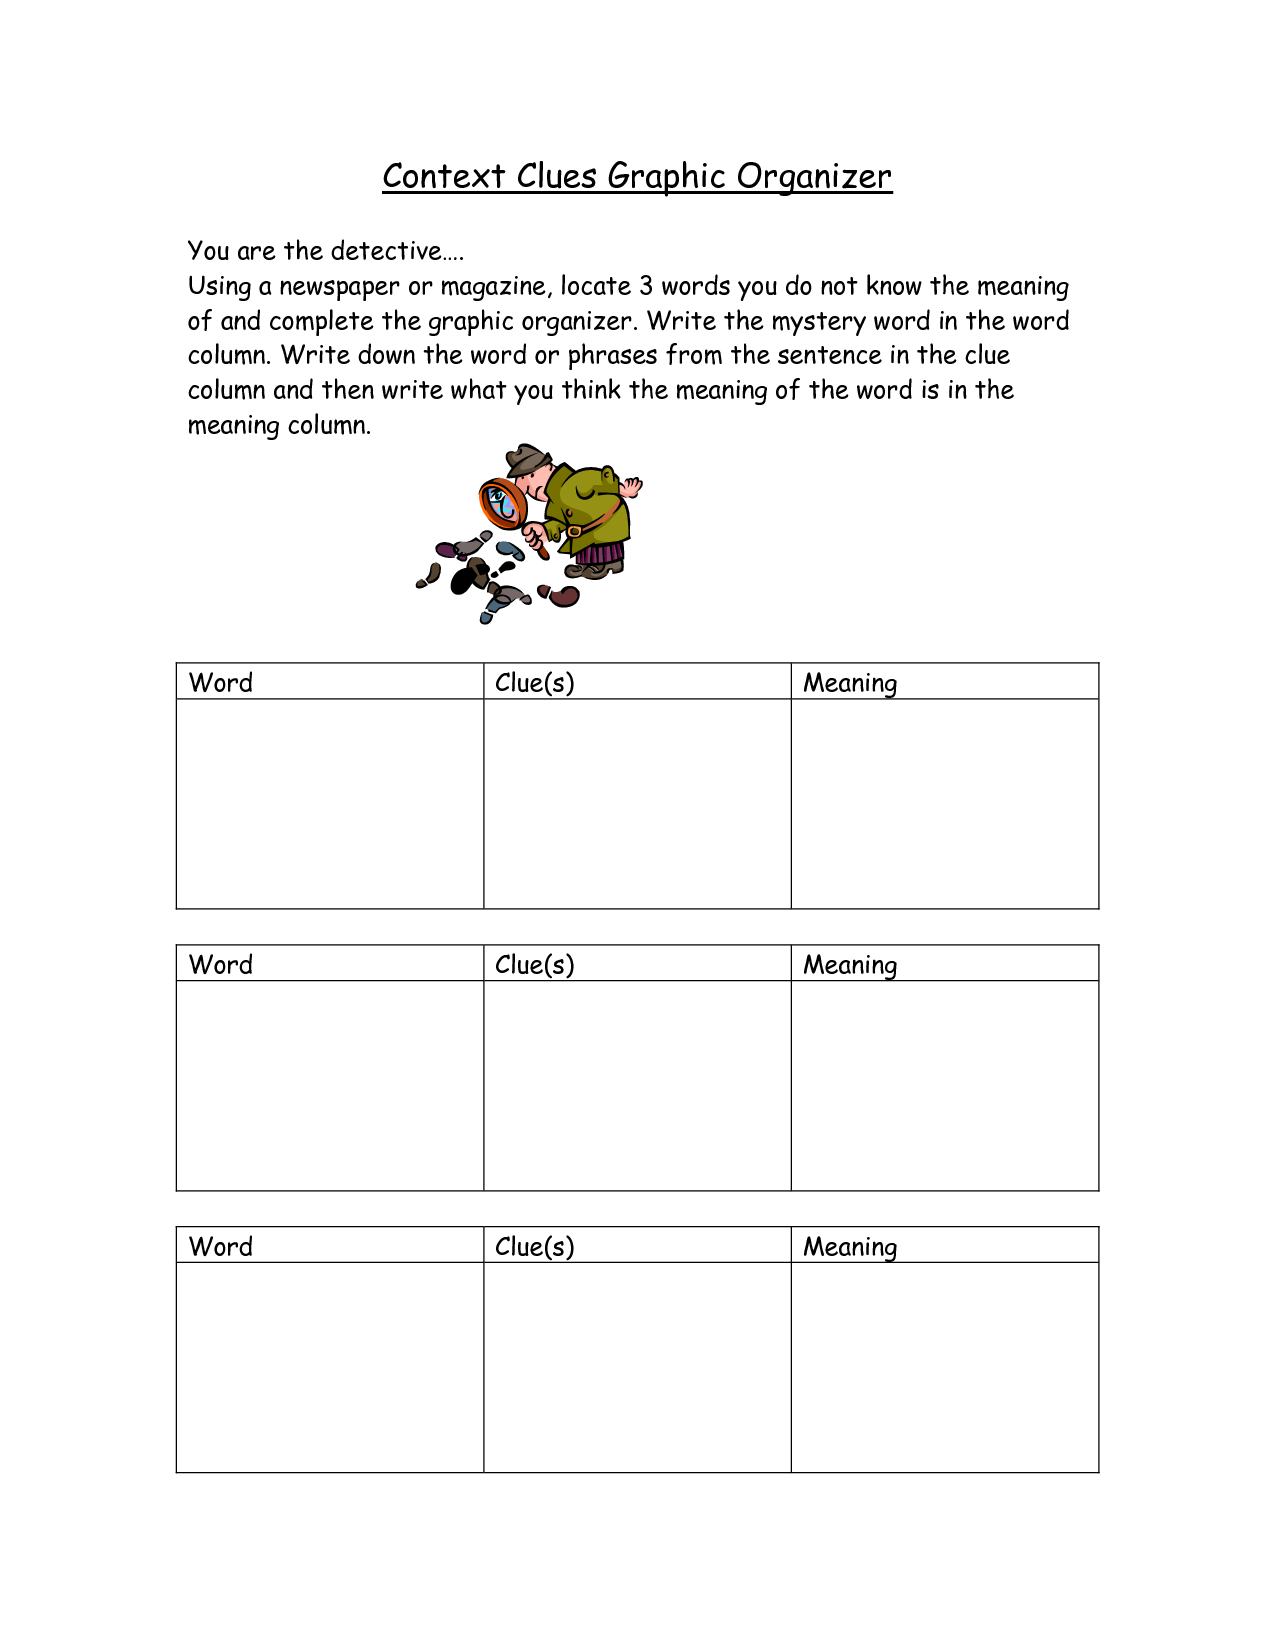 18-best-images-of-context-clues-worksheets-printable-vocabulary-word